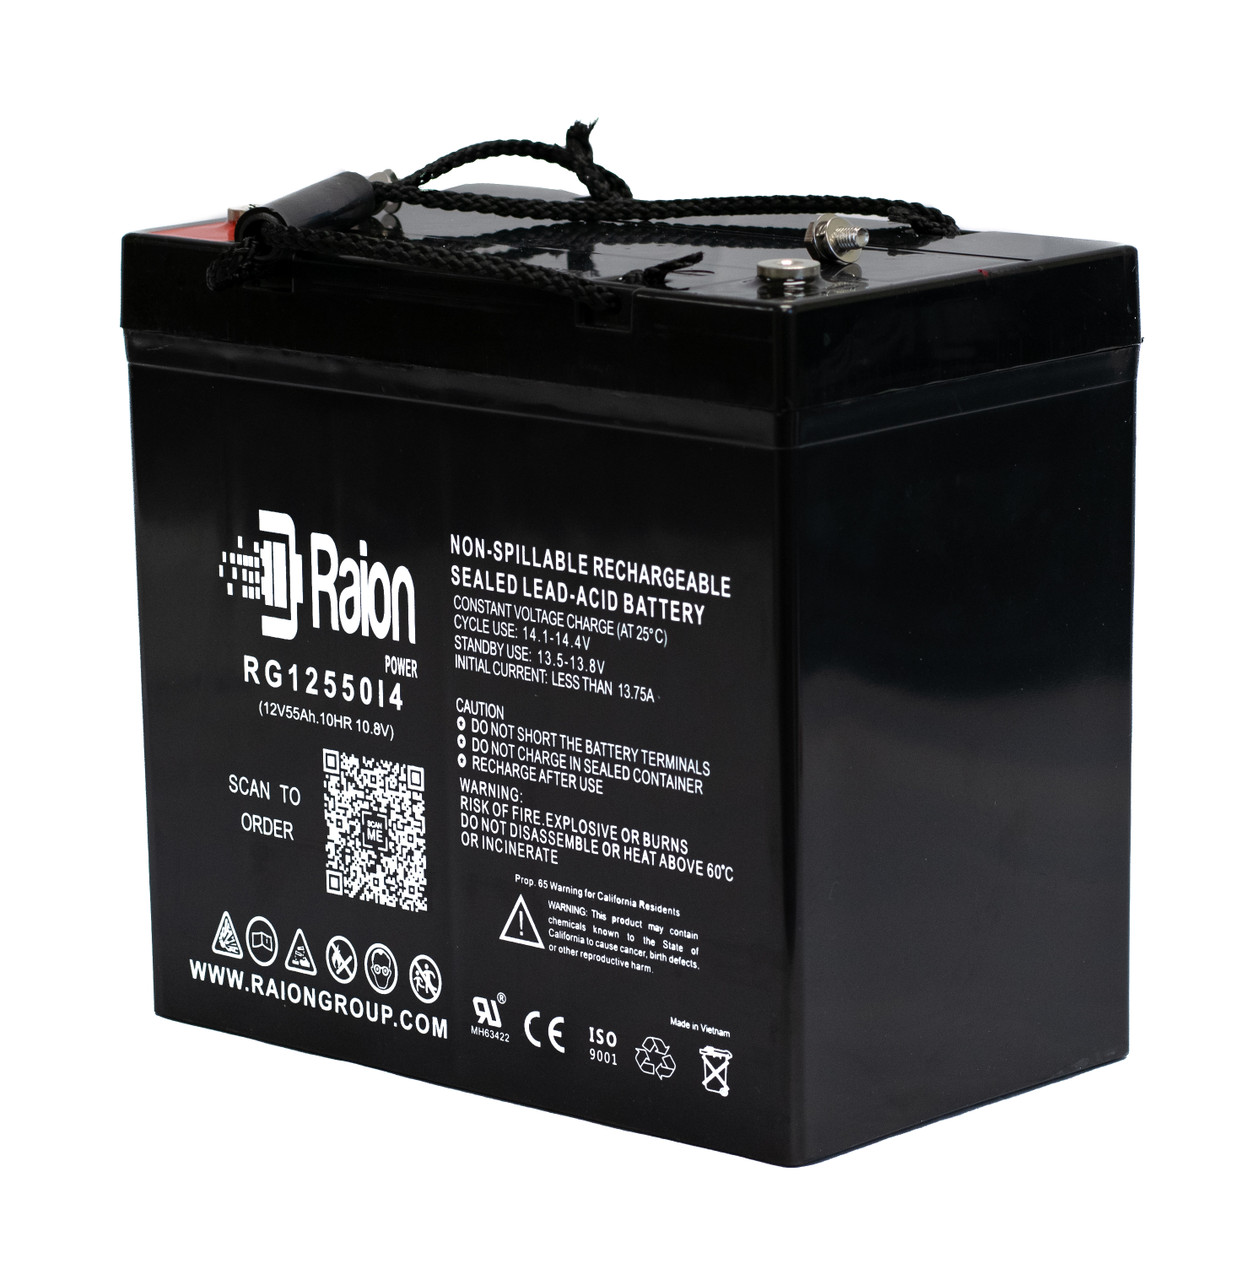 Raion Power 12V 55Ah 22NF Mobility Scooter Battery Replacement for Fortress Scientific 2000FS